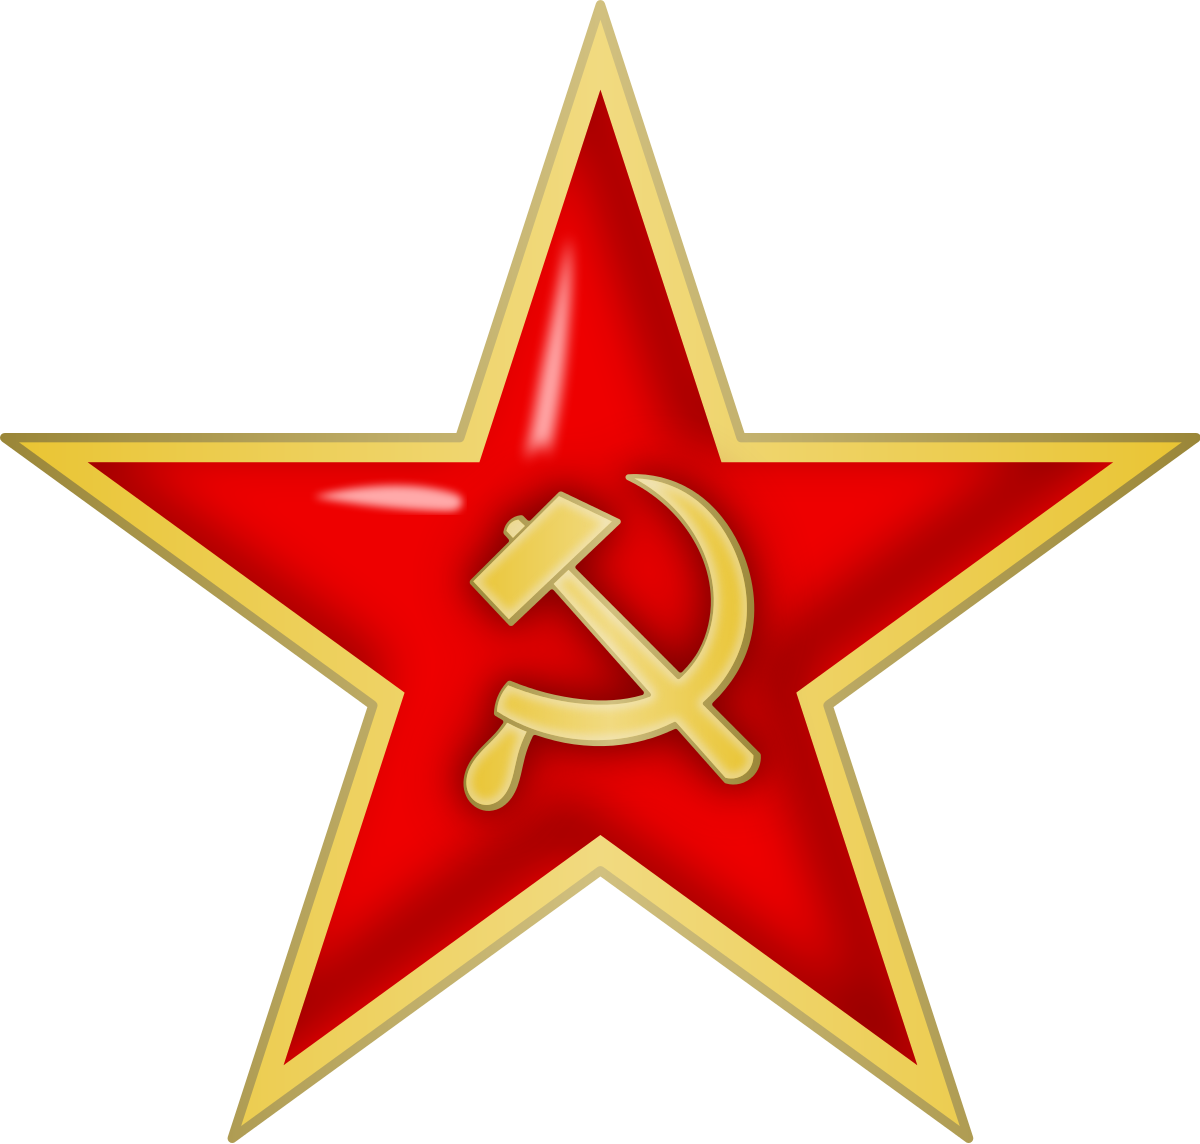 https://upload.wikimedia.org/wikipedia/commons/thumb/a/ac/Red_Army_Badge.svg/1200px-Red_Army_Badge.svg.png